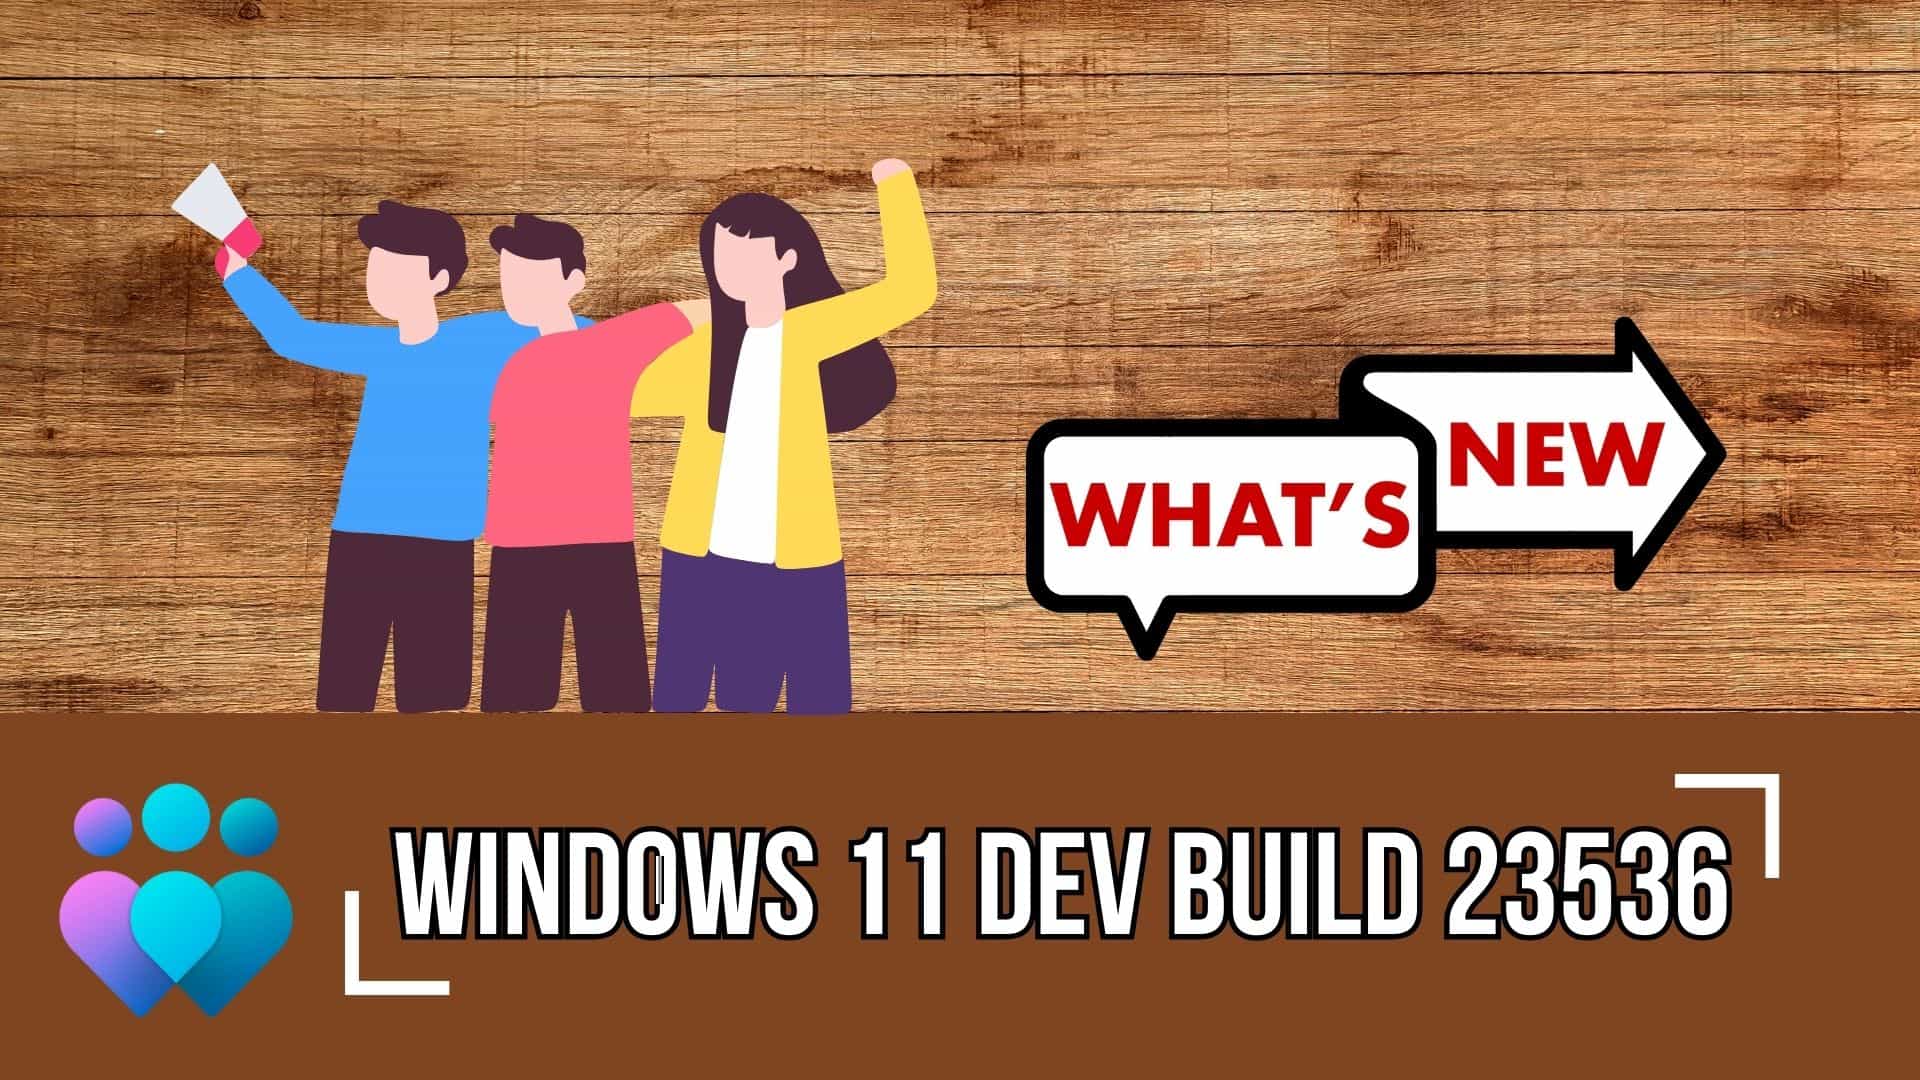 What's new and improved in Windows 11 Dev (Preview) Build 23536?